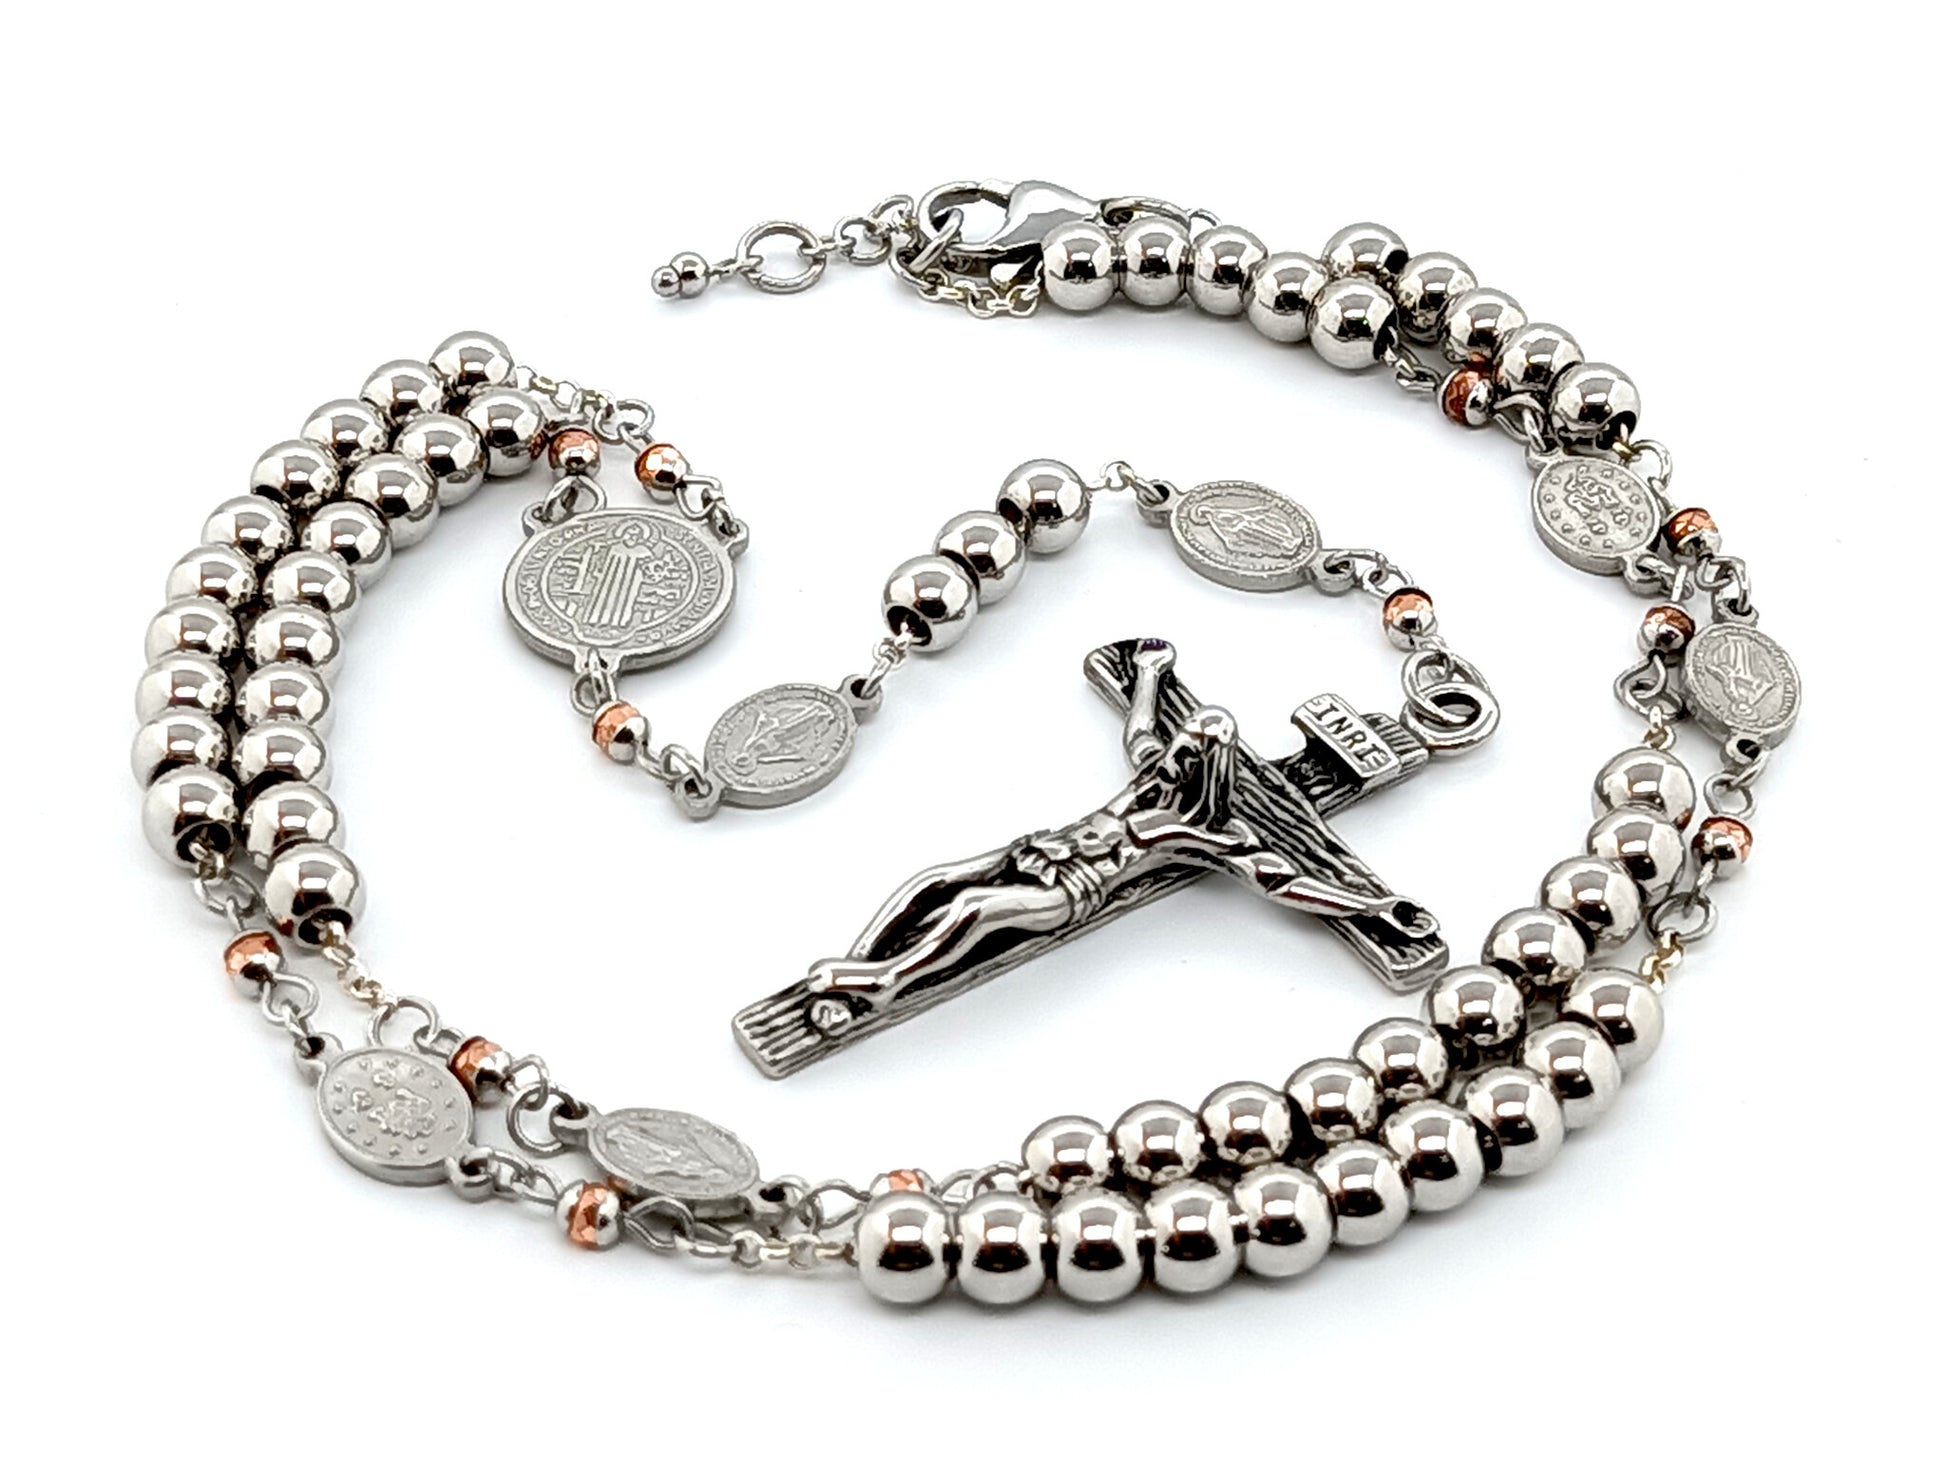 Saint Benedict unique rosary beads with genuine 925 sterling silver chain, stainless steel beads, medals and crucifix.